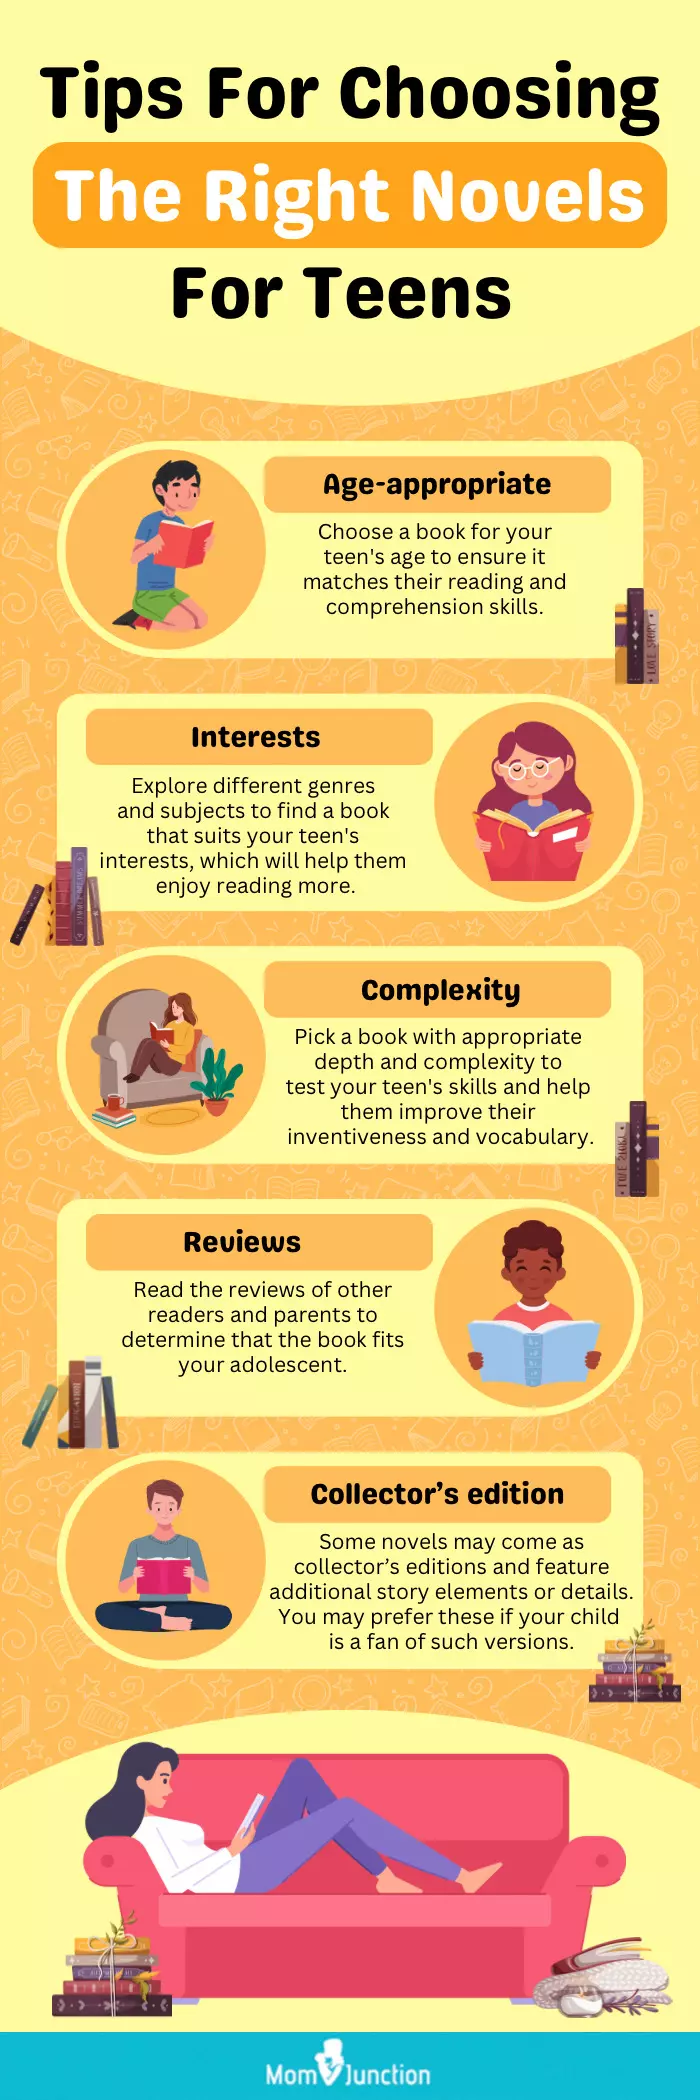 Tips For Choosing The Right Novels For Teens (infographic)